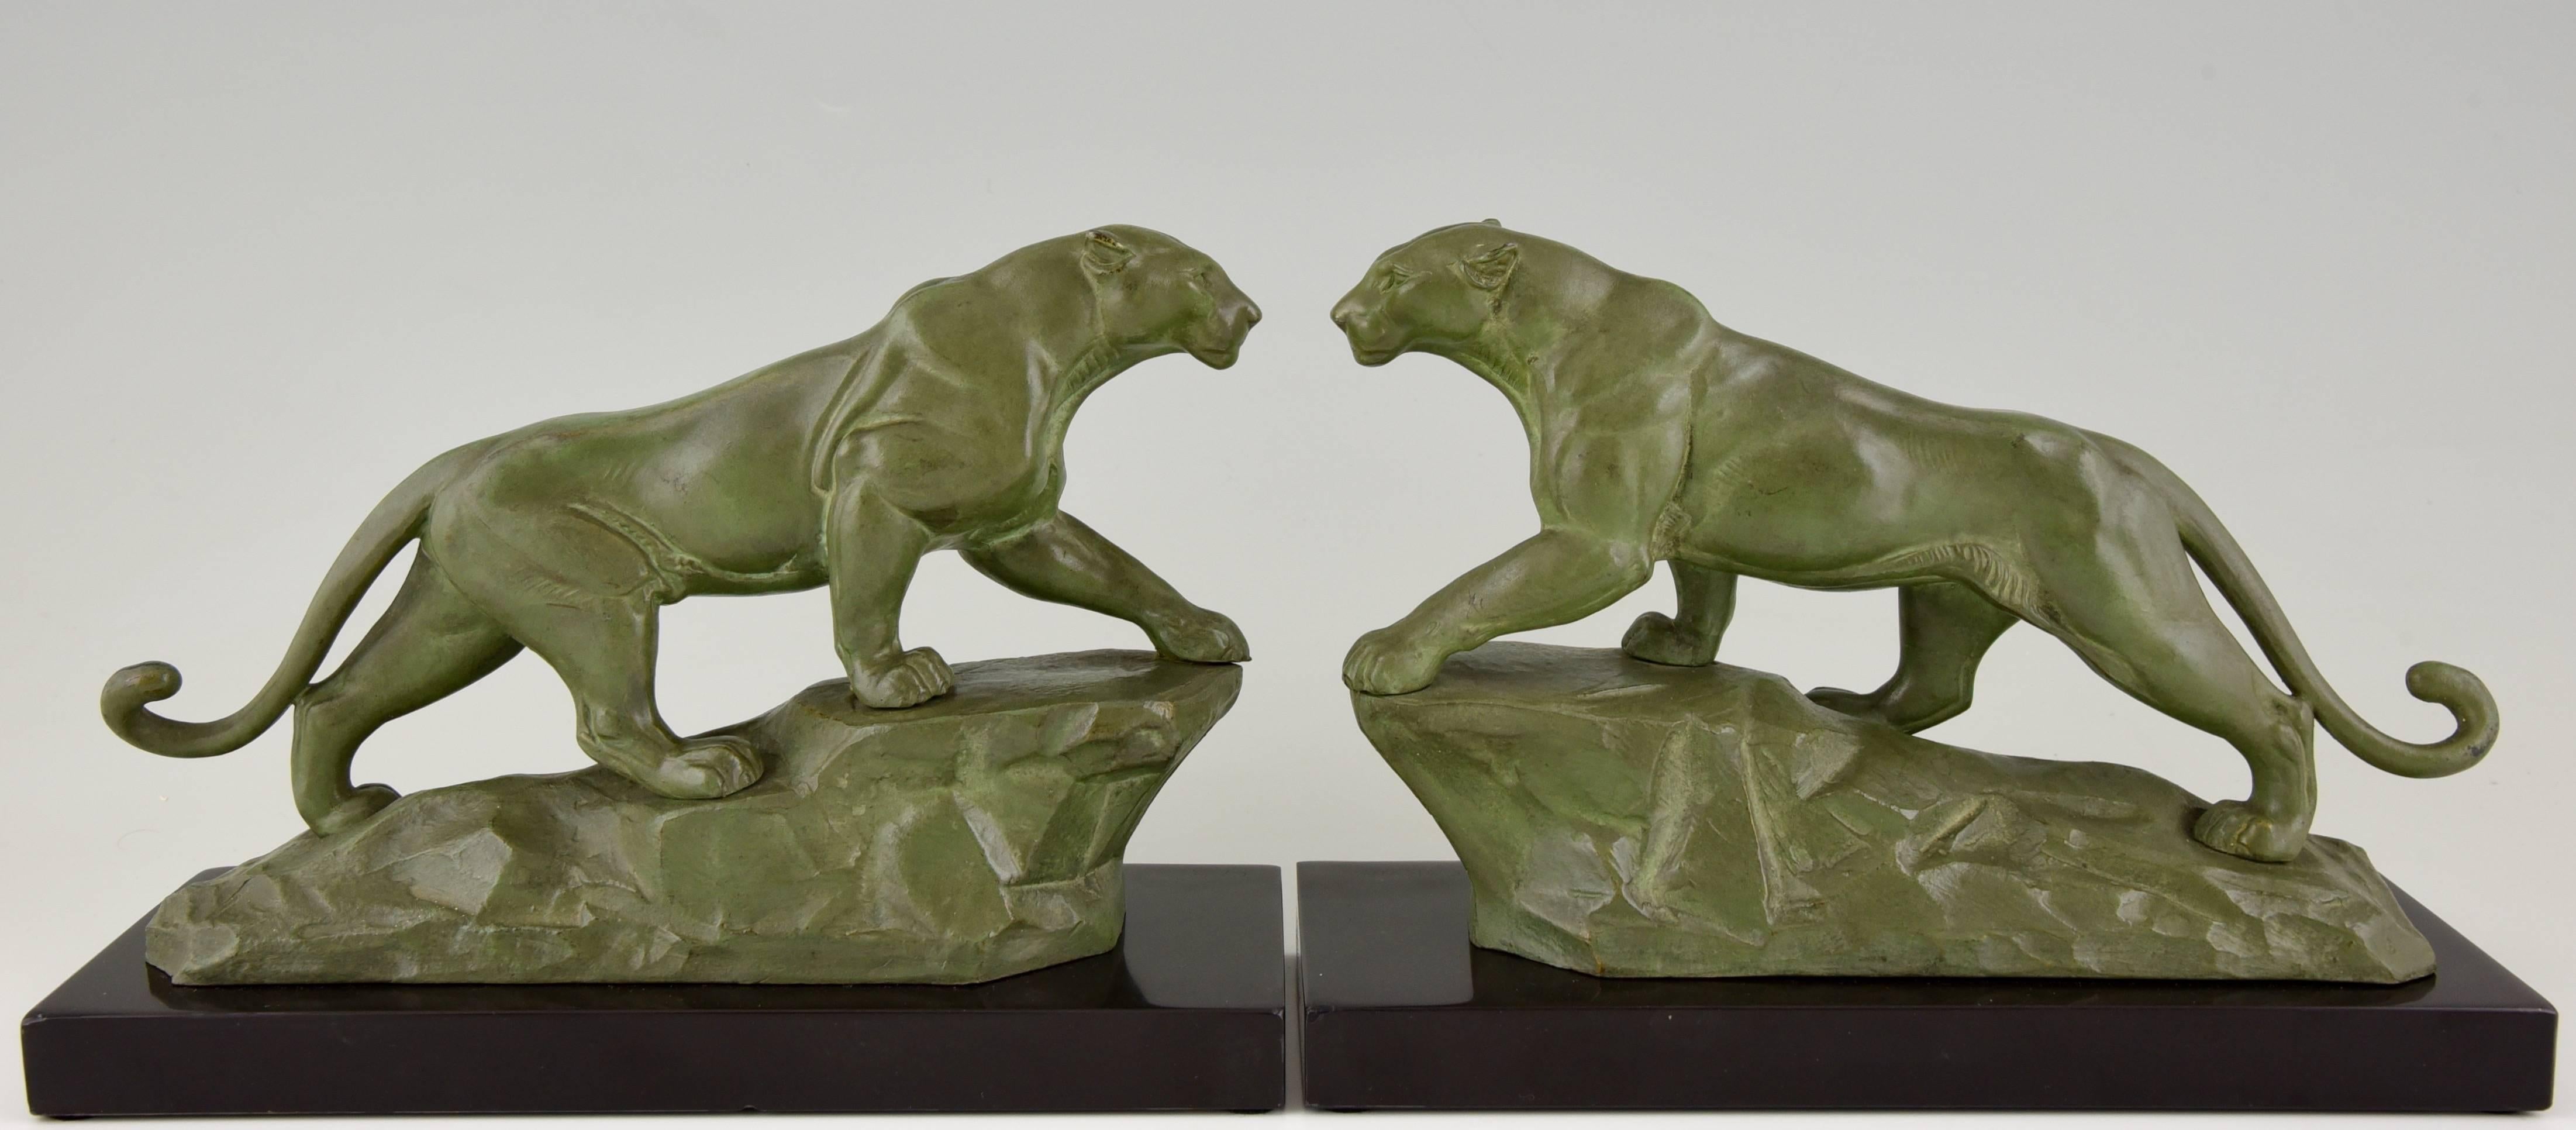 A very nice pair of Art Deco panther bookends by the French artist Louis Albert Carvin on a marble base. 

Artist / Maker:
Louis Albert Carvin.
Signature / Marks:
Carvin.
Style:
Art Deco.
Date:
1930.
Material:
Patinated metal on a marble